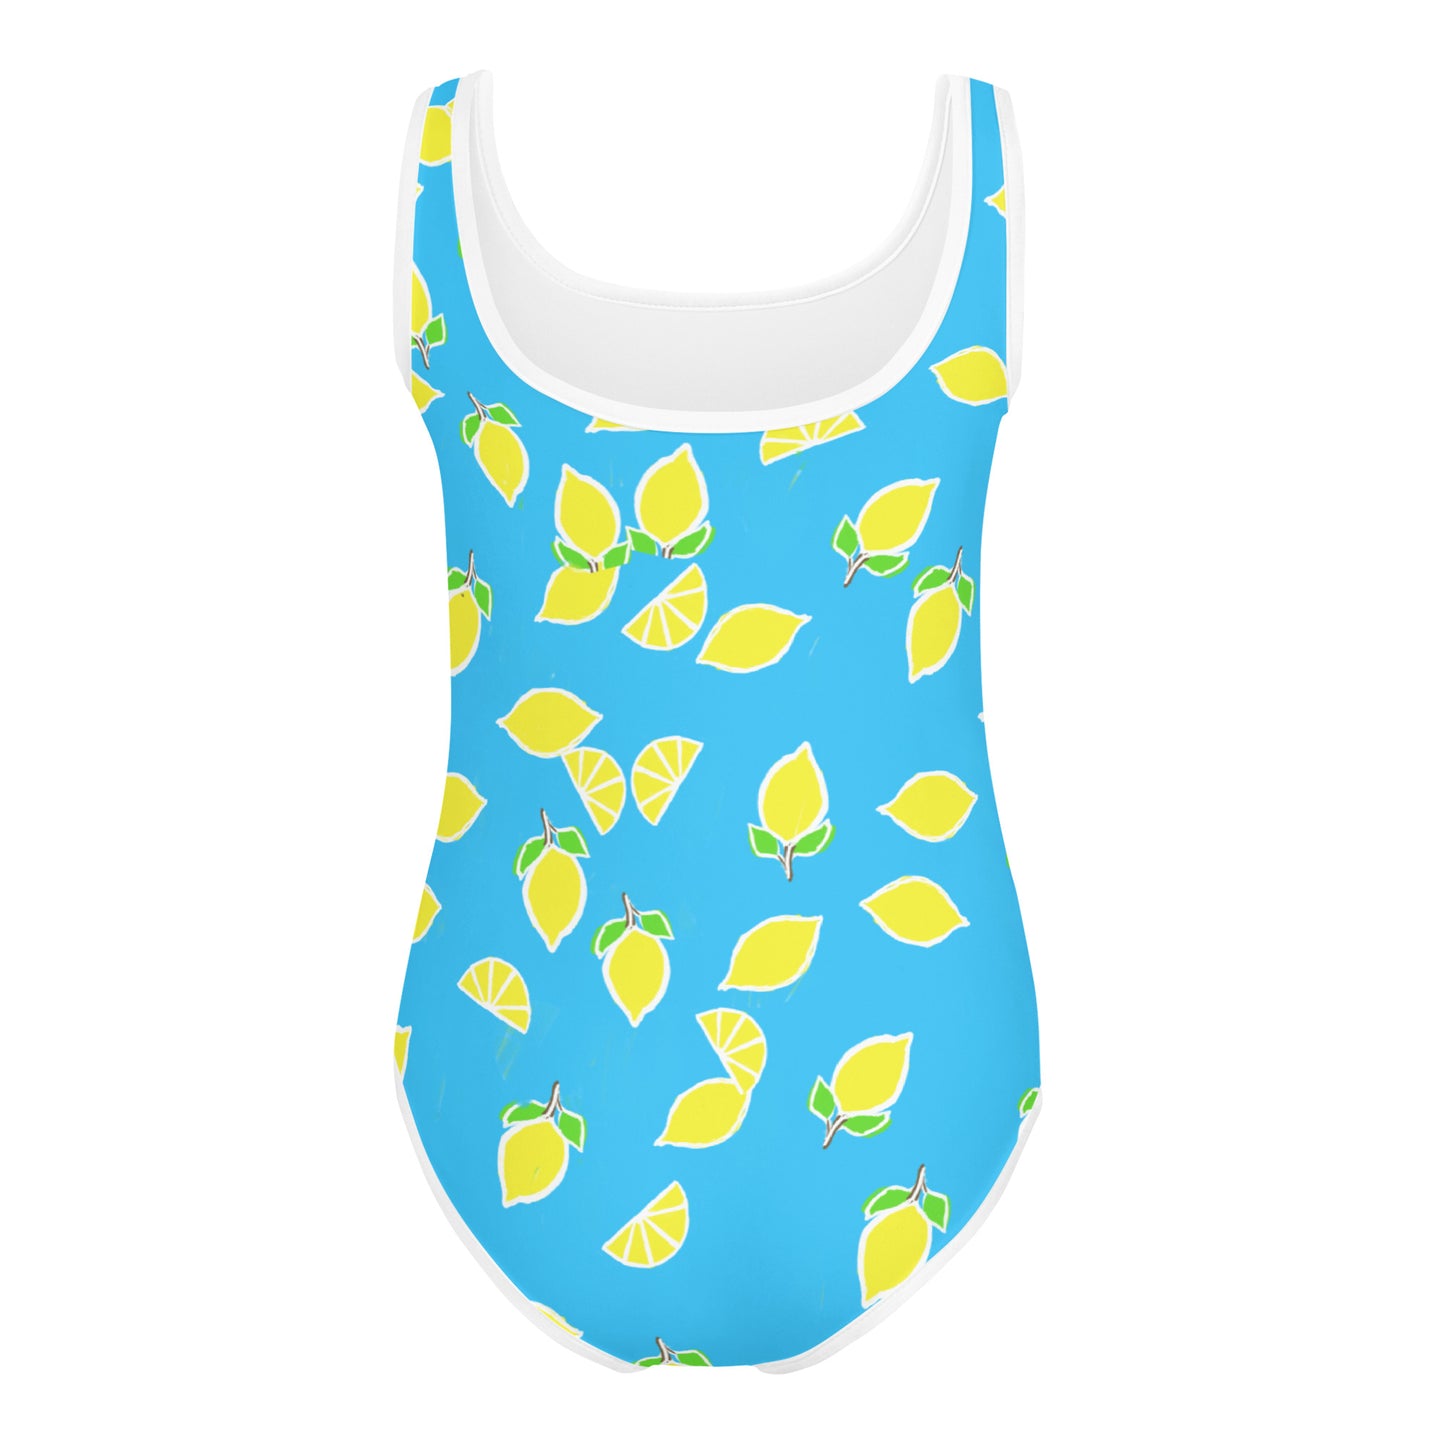 Girls' Athletic Swimsuit One Piece blue with lemons (Kids 2T-7) FREE SHIPPING